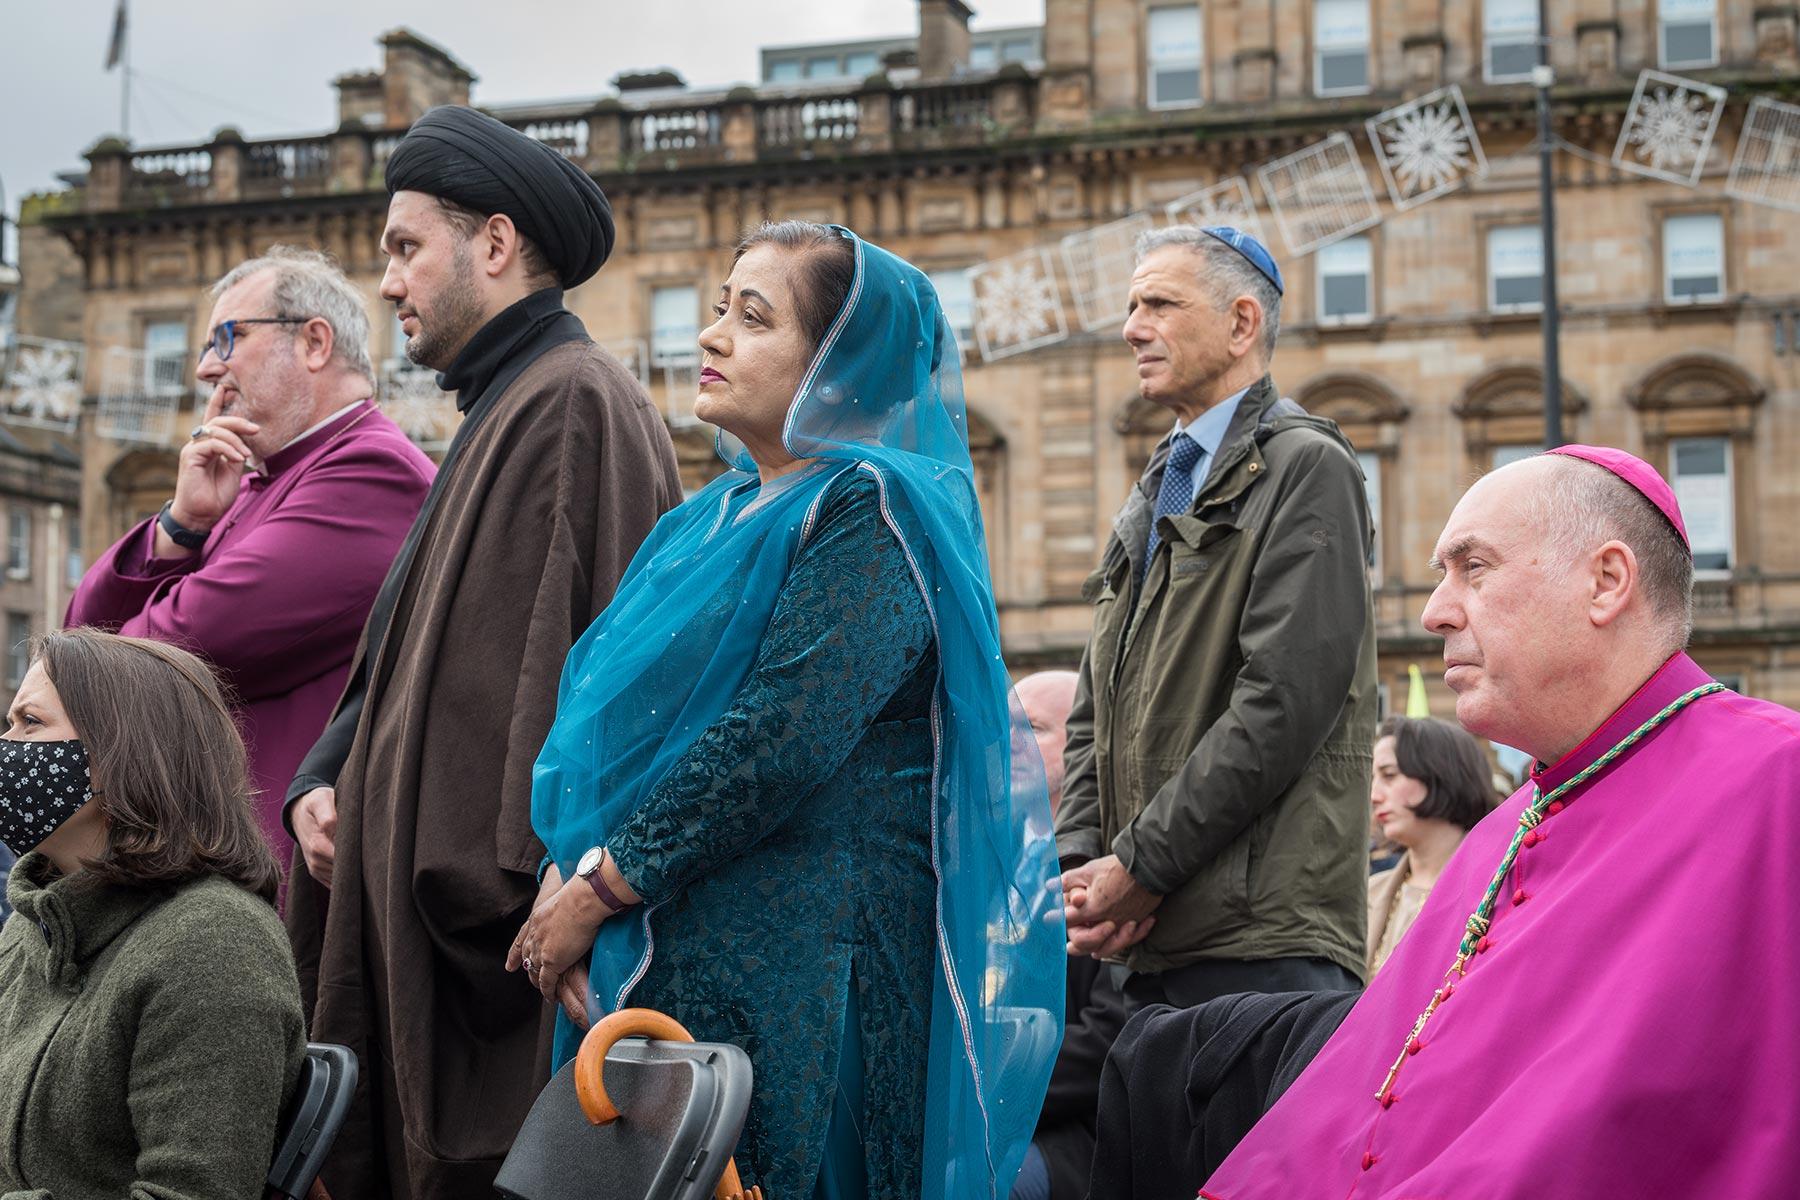 Interfaith vigil held at George Square on the opening day of the UN Climate Change Conference COP26 in Glasgow. The vigil gathered representatives from a wide range of religions as well as people of no faith. Photo: LWF/Albin Hillert